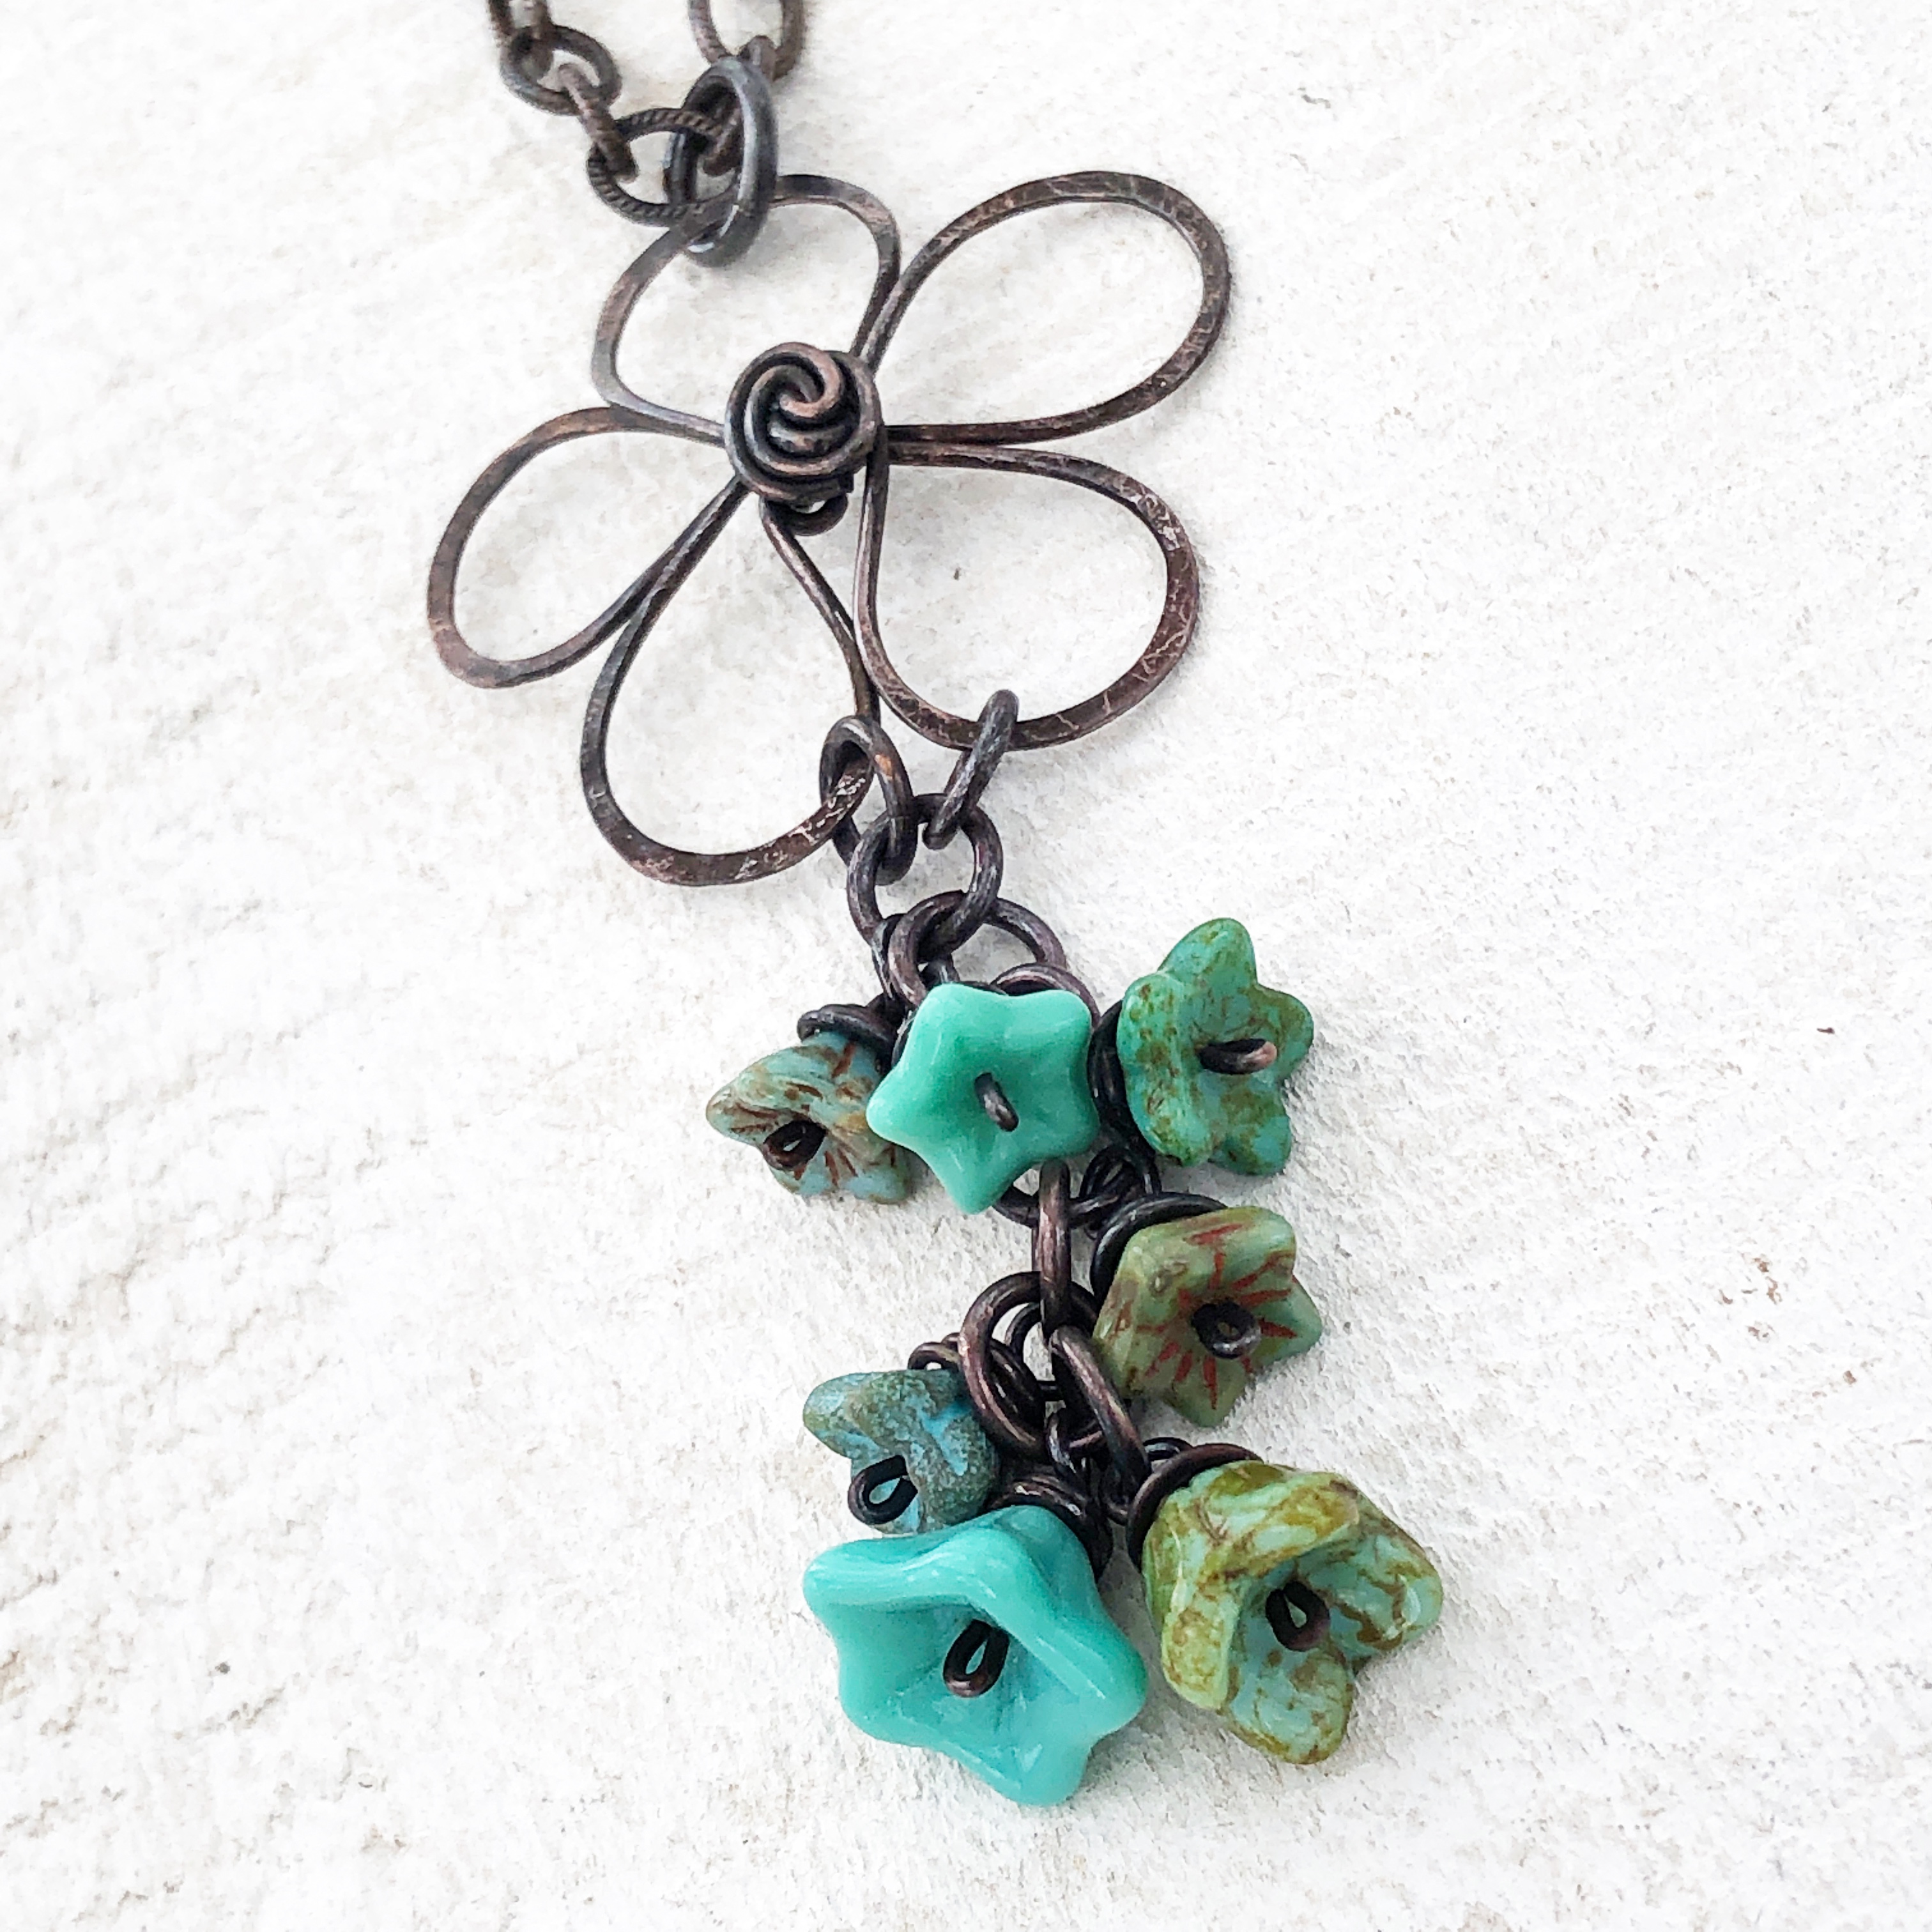 Copper wirework flower with handwrapped turquoise Czech glass beads